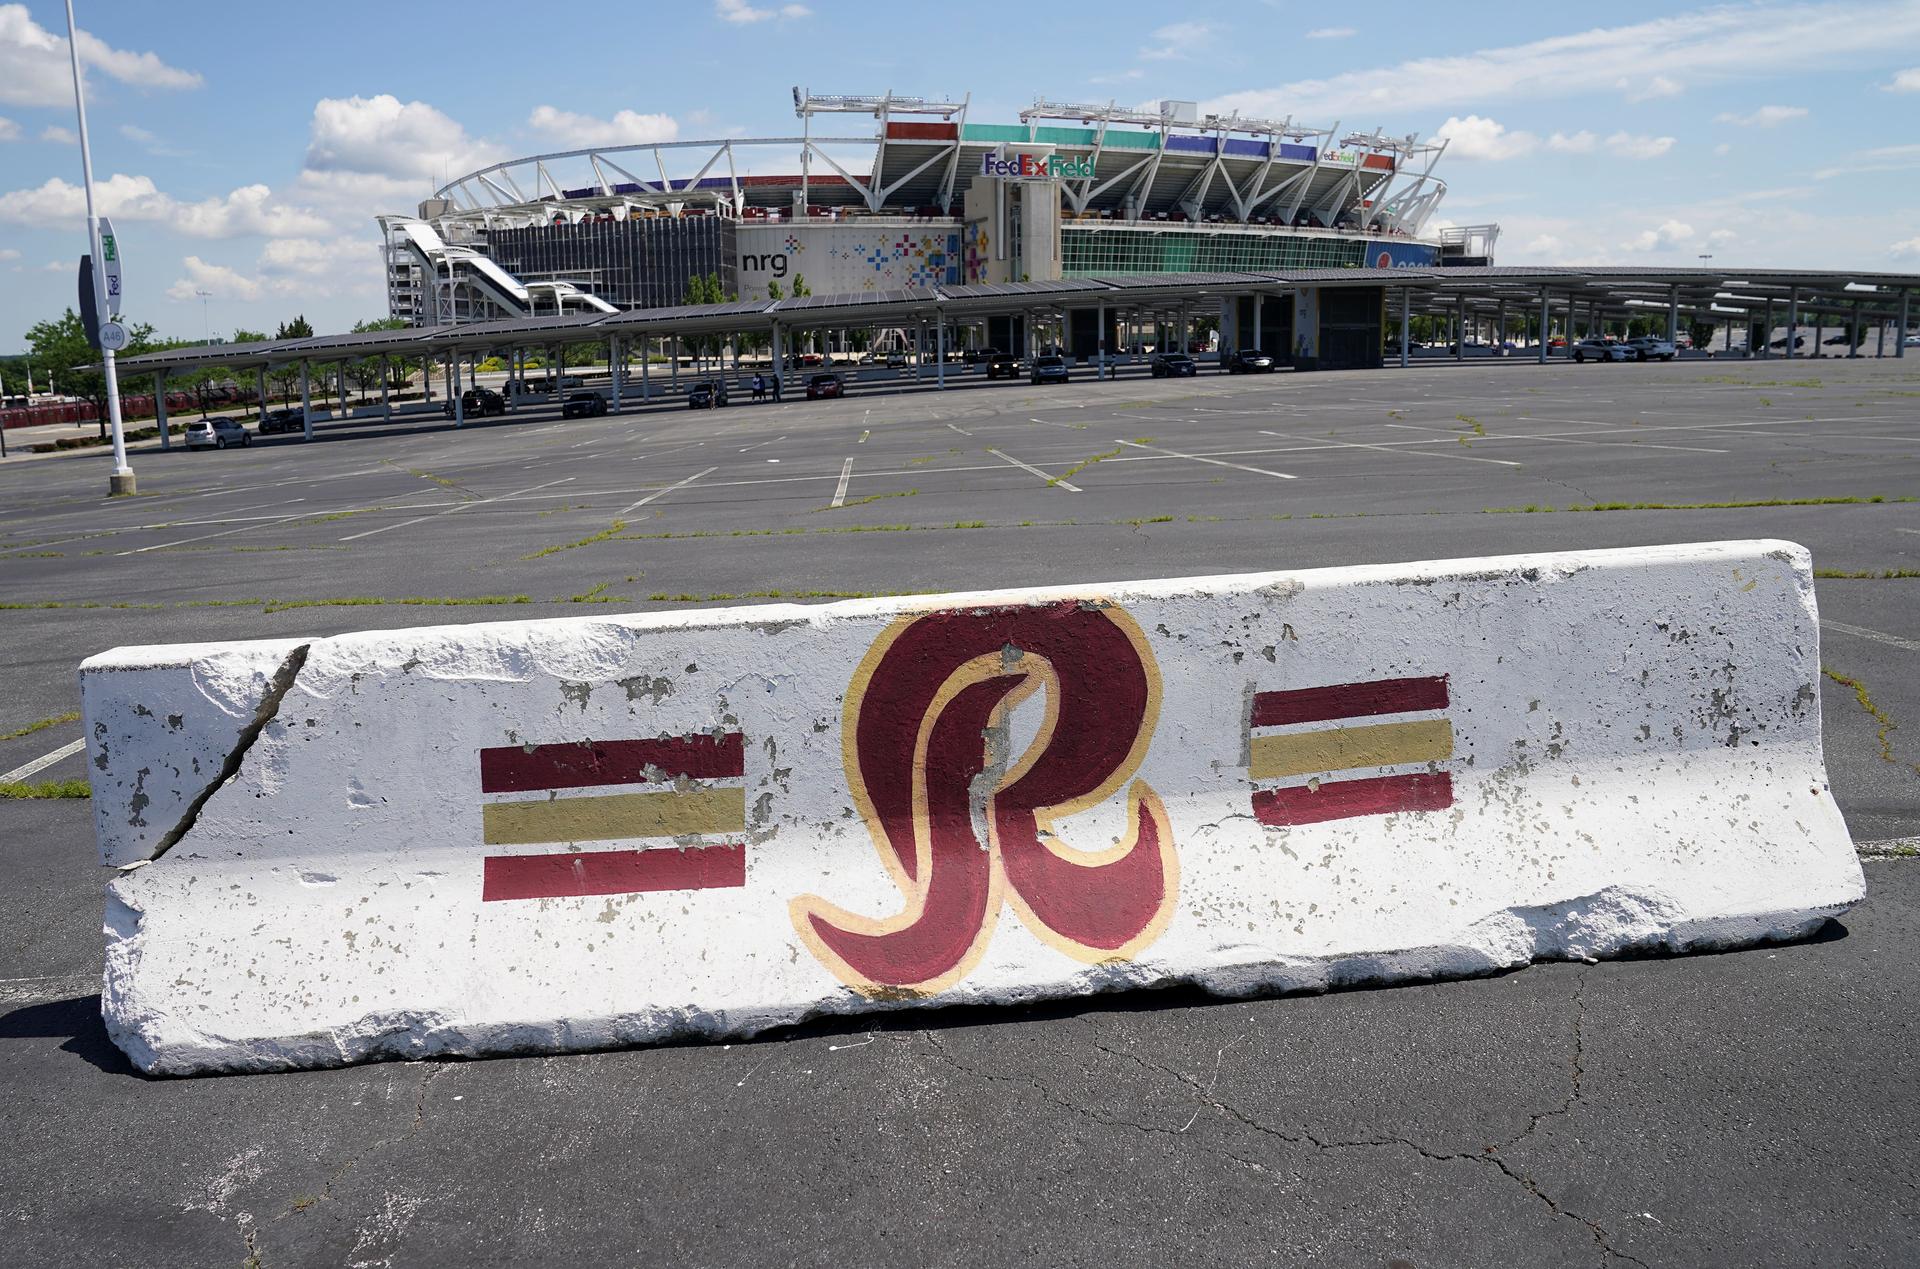 A parking barricade features the red letter R in a parking lot outside of a stadium.